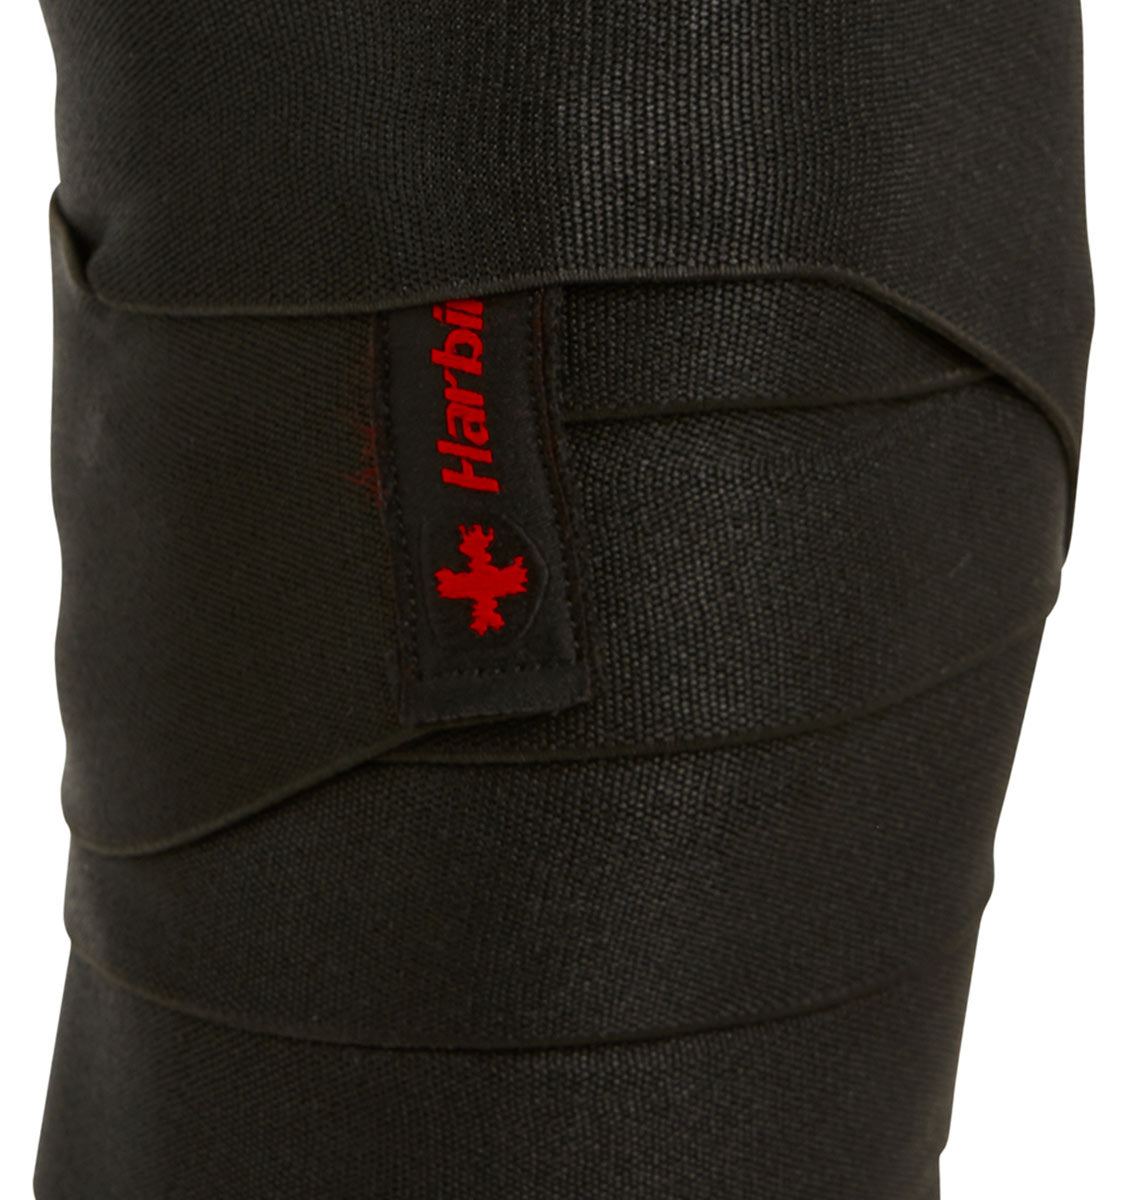 46700 Harbinger 72 inch Power Knee Wrap Front Close Up